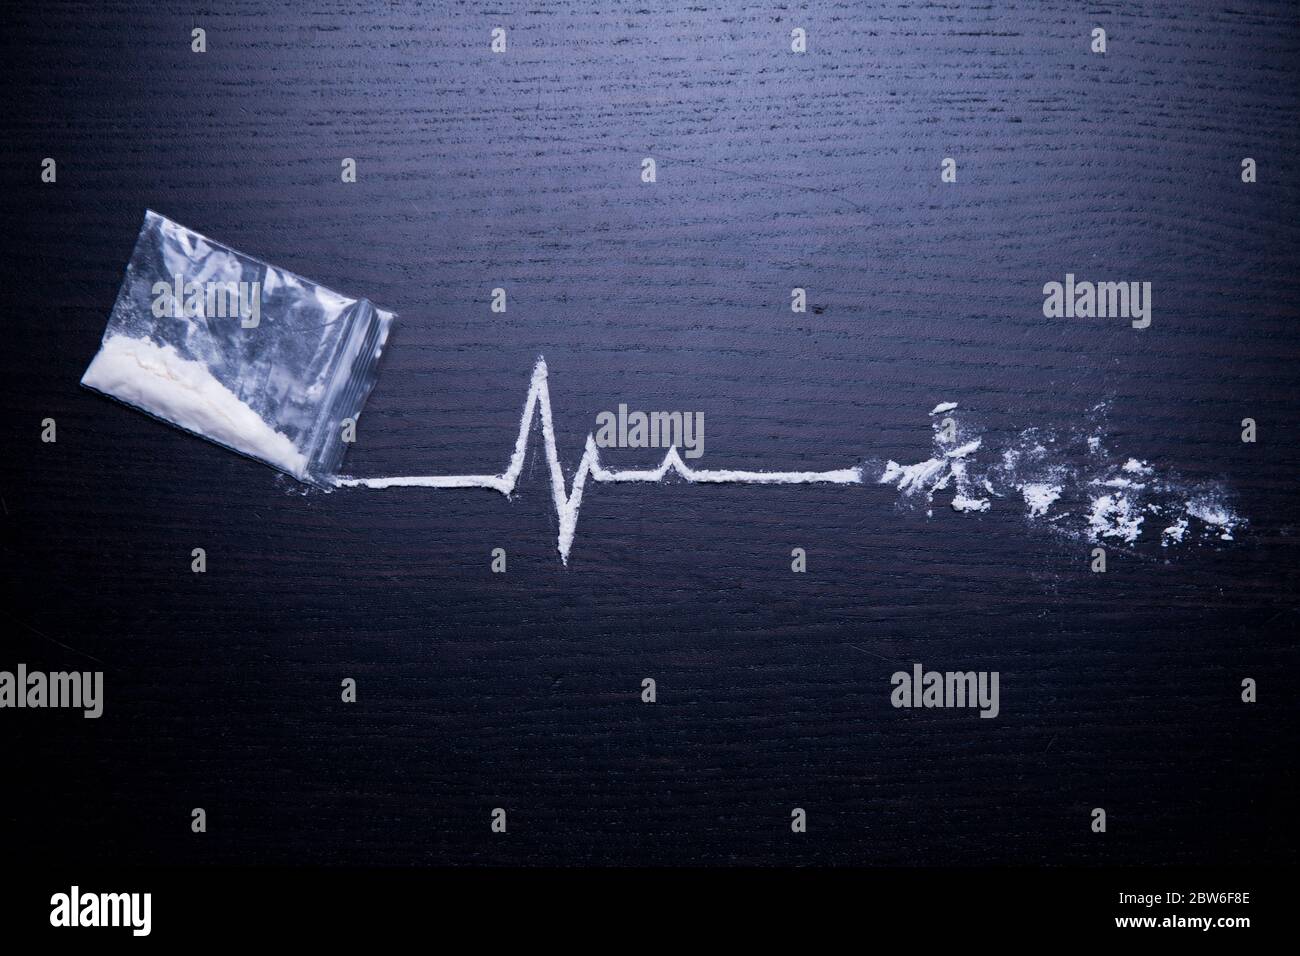 the cocaine lane from the sachet depicts a heartbeat line and dissolves at the end. Bad total drug use Stock Photo